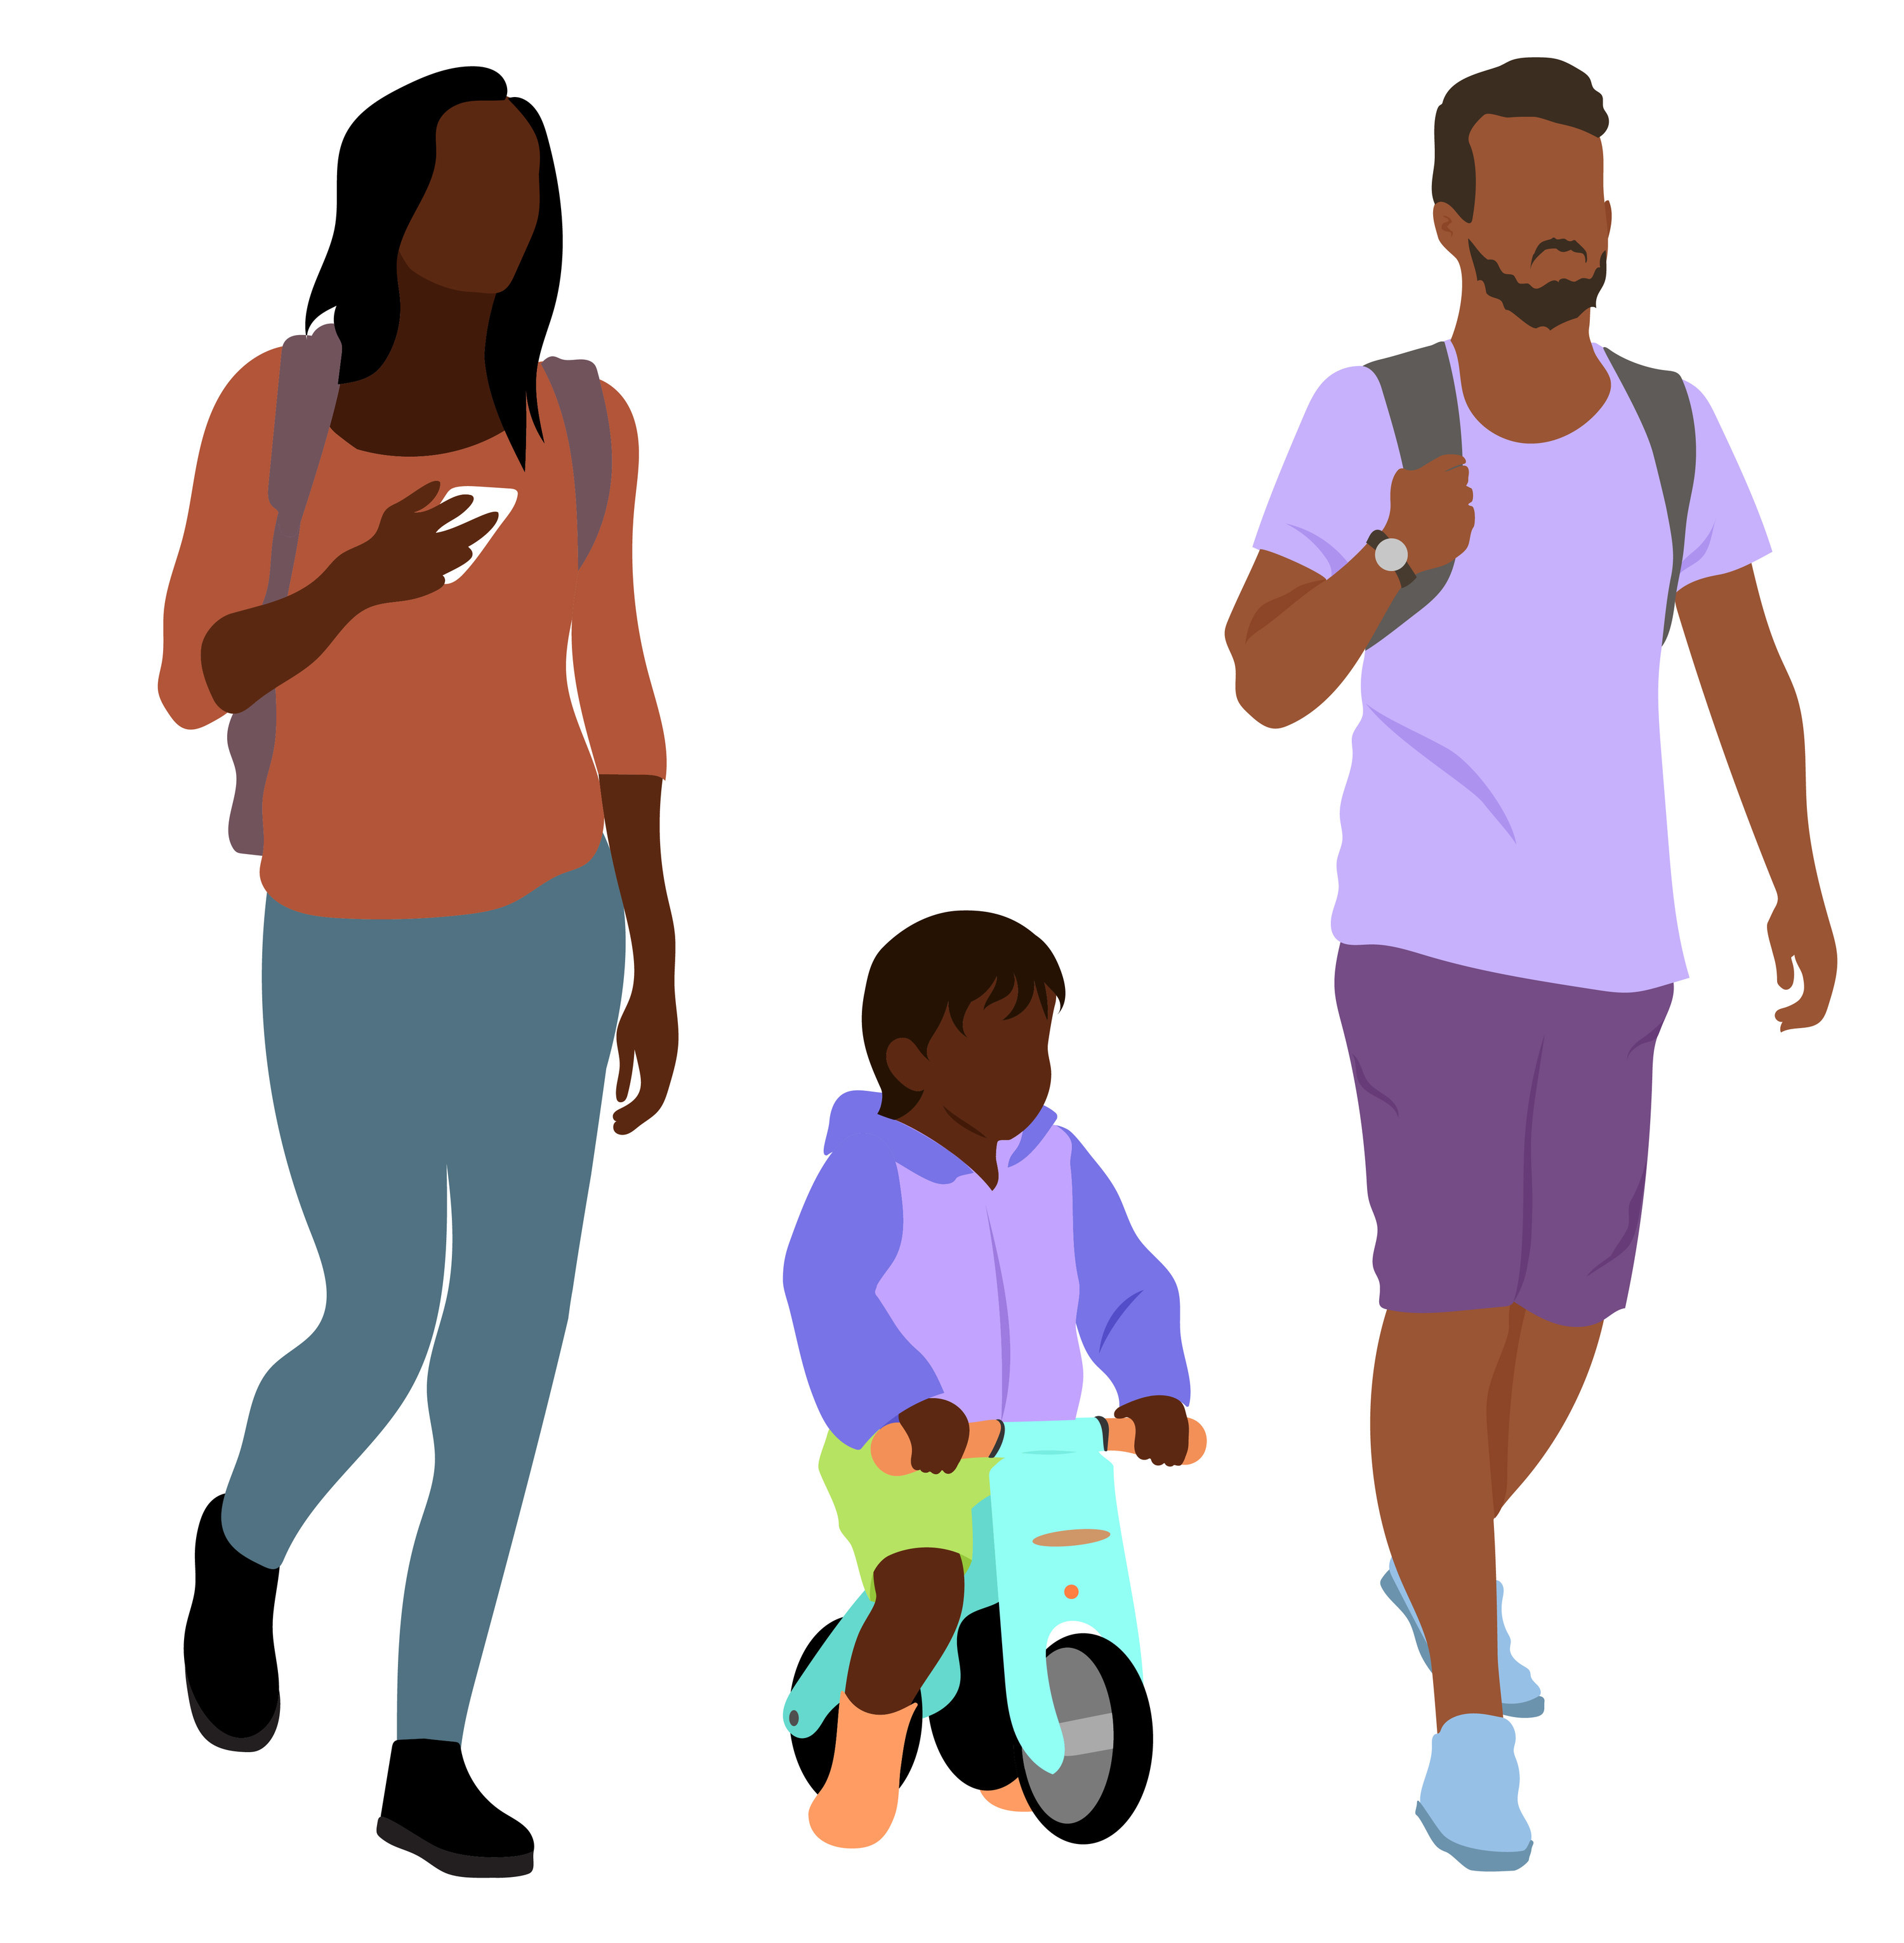 Clip art of a family walking together, the child riding a toy bike